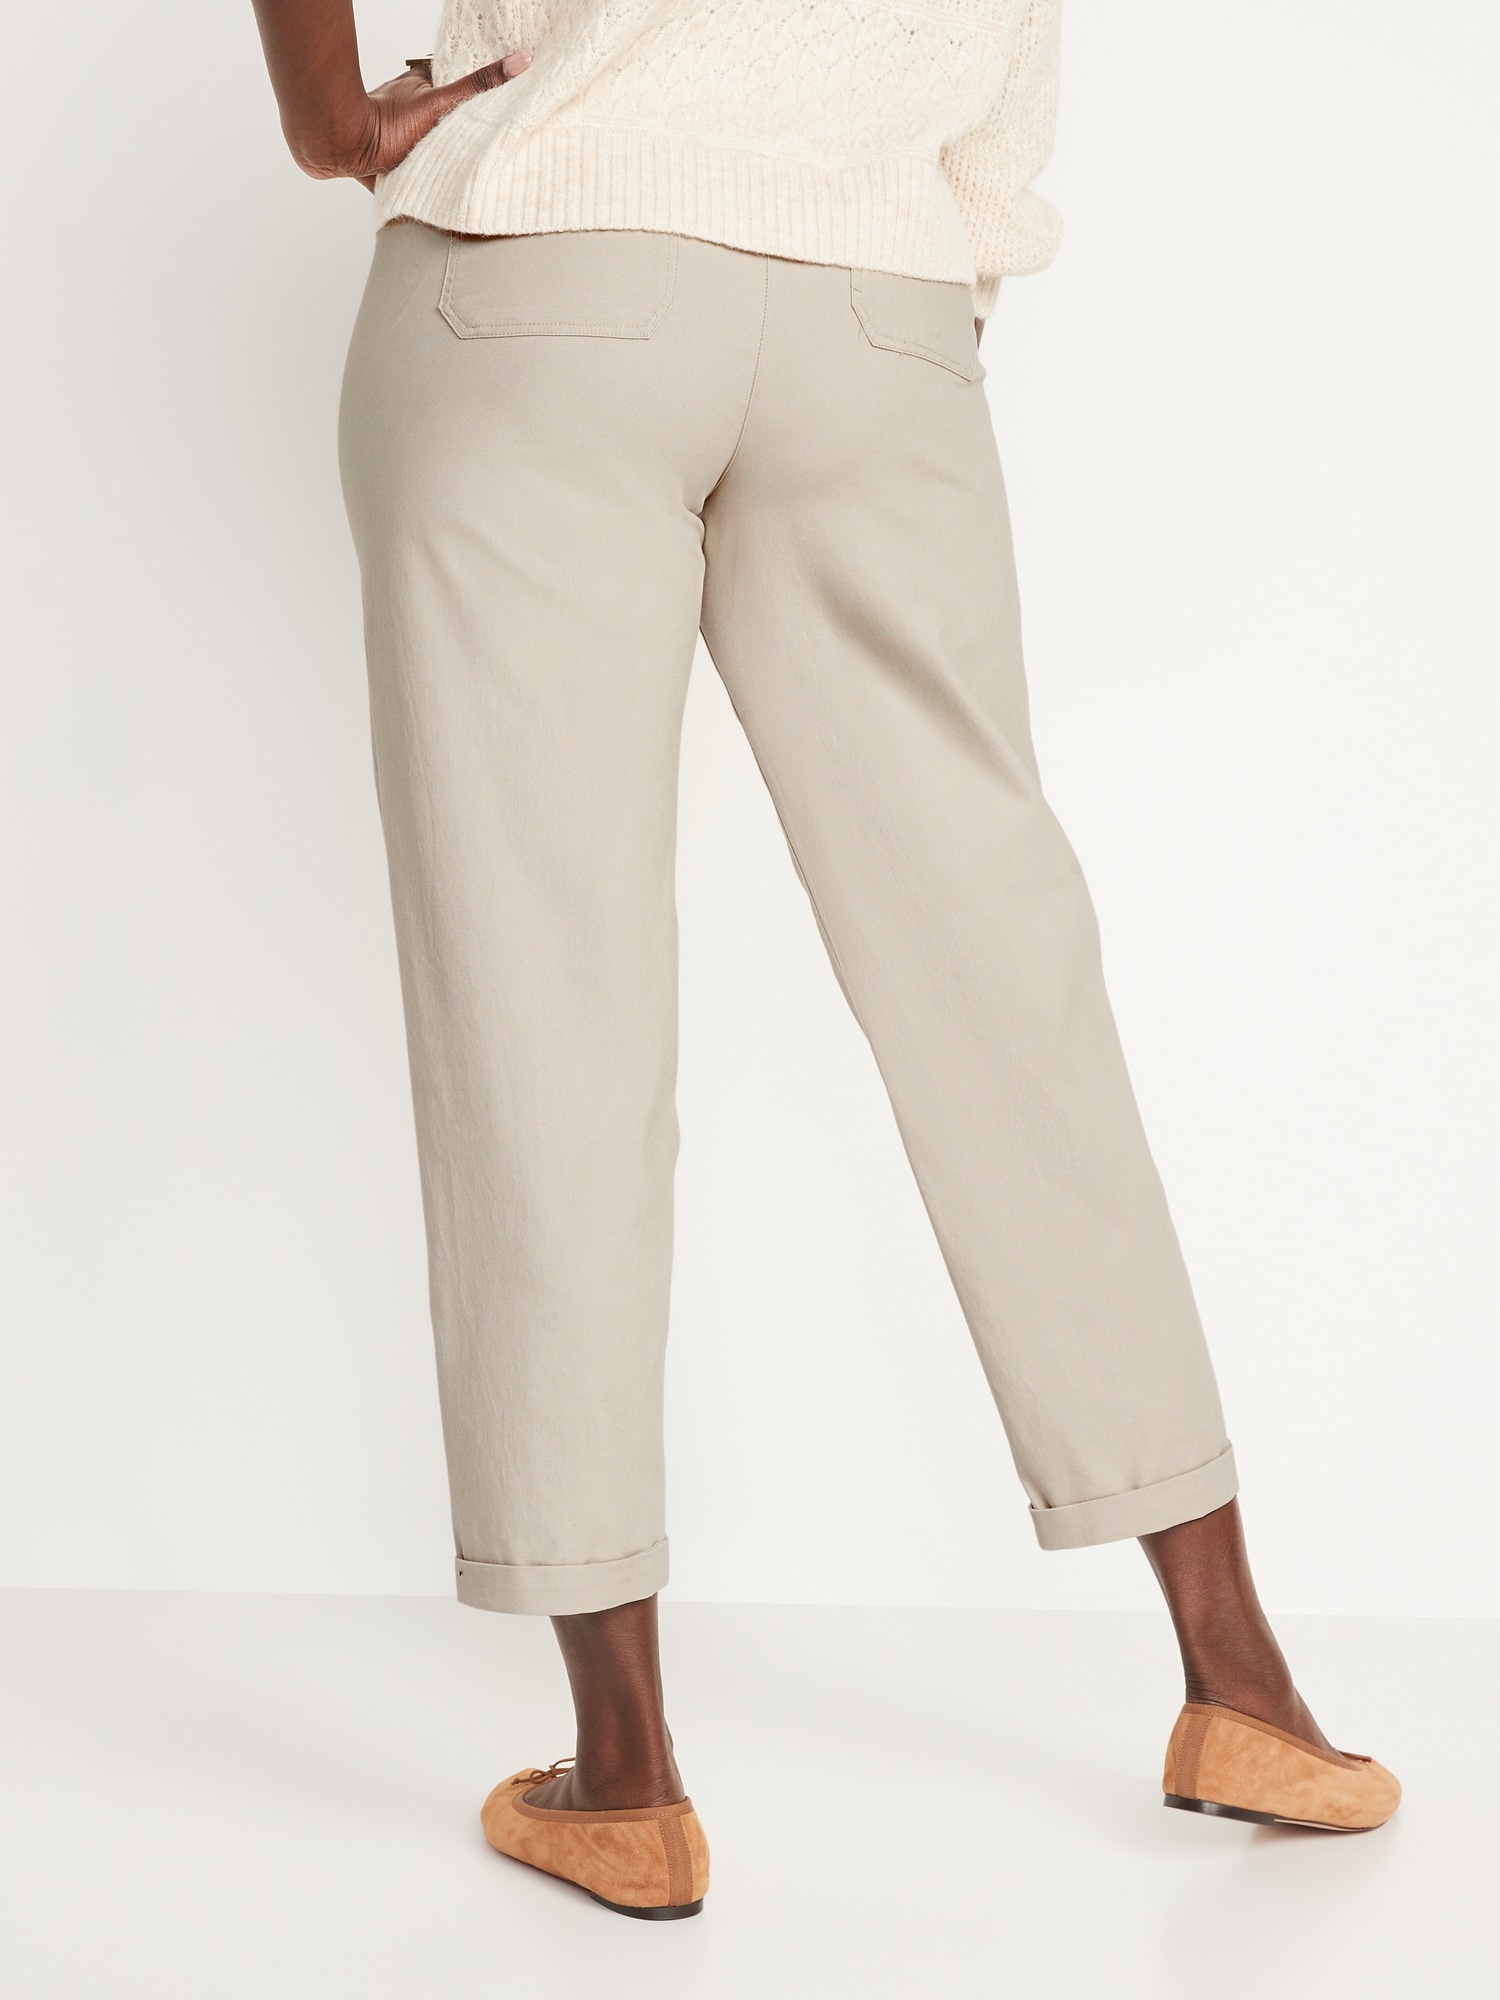 High-Waisted Workwear Barrel-Leg Pants for Women | Old Navy